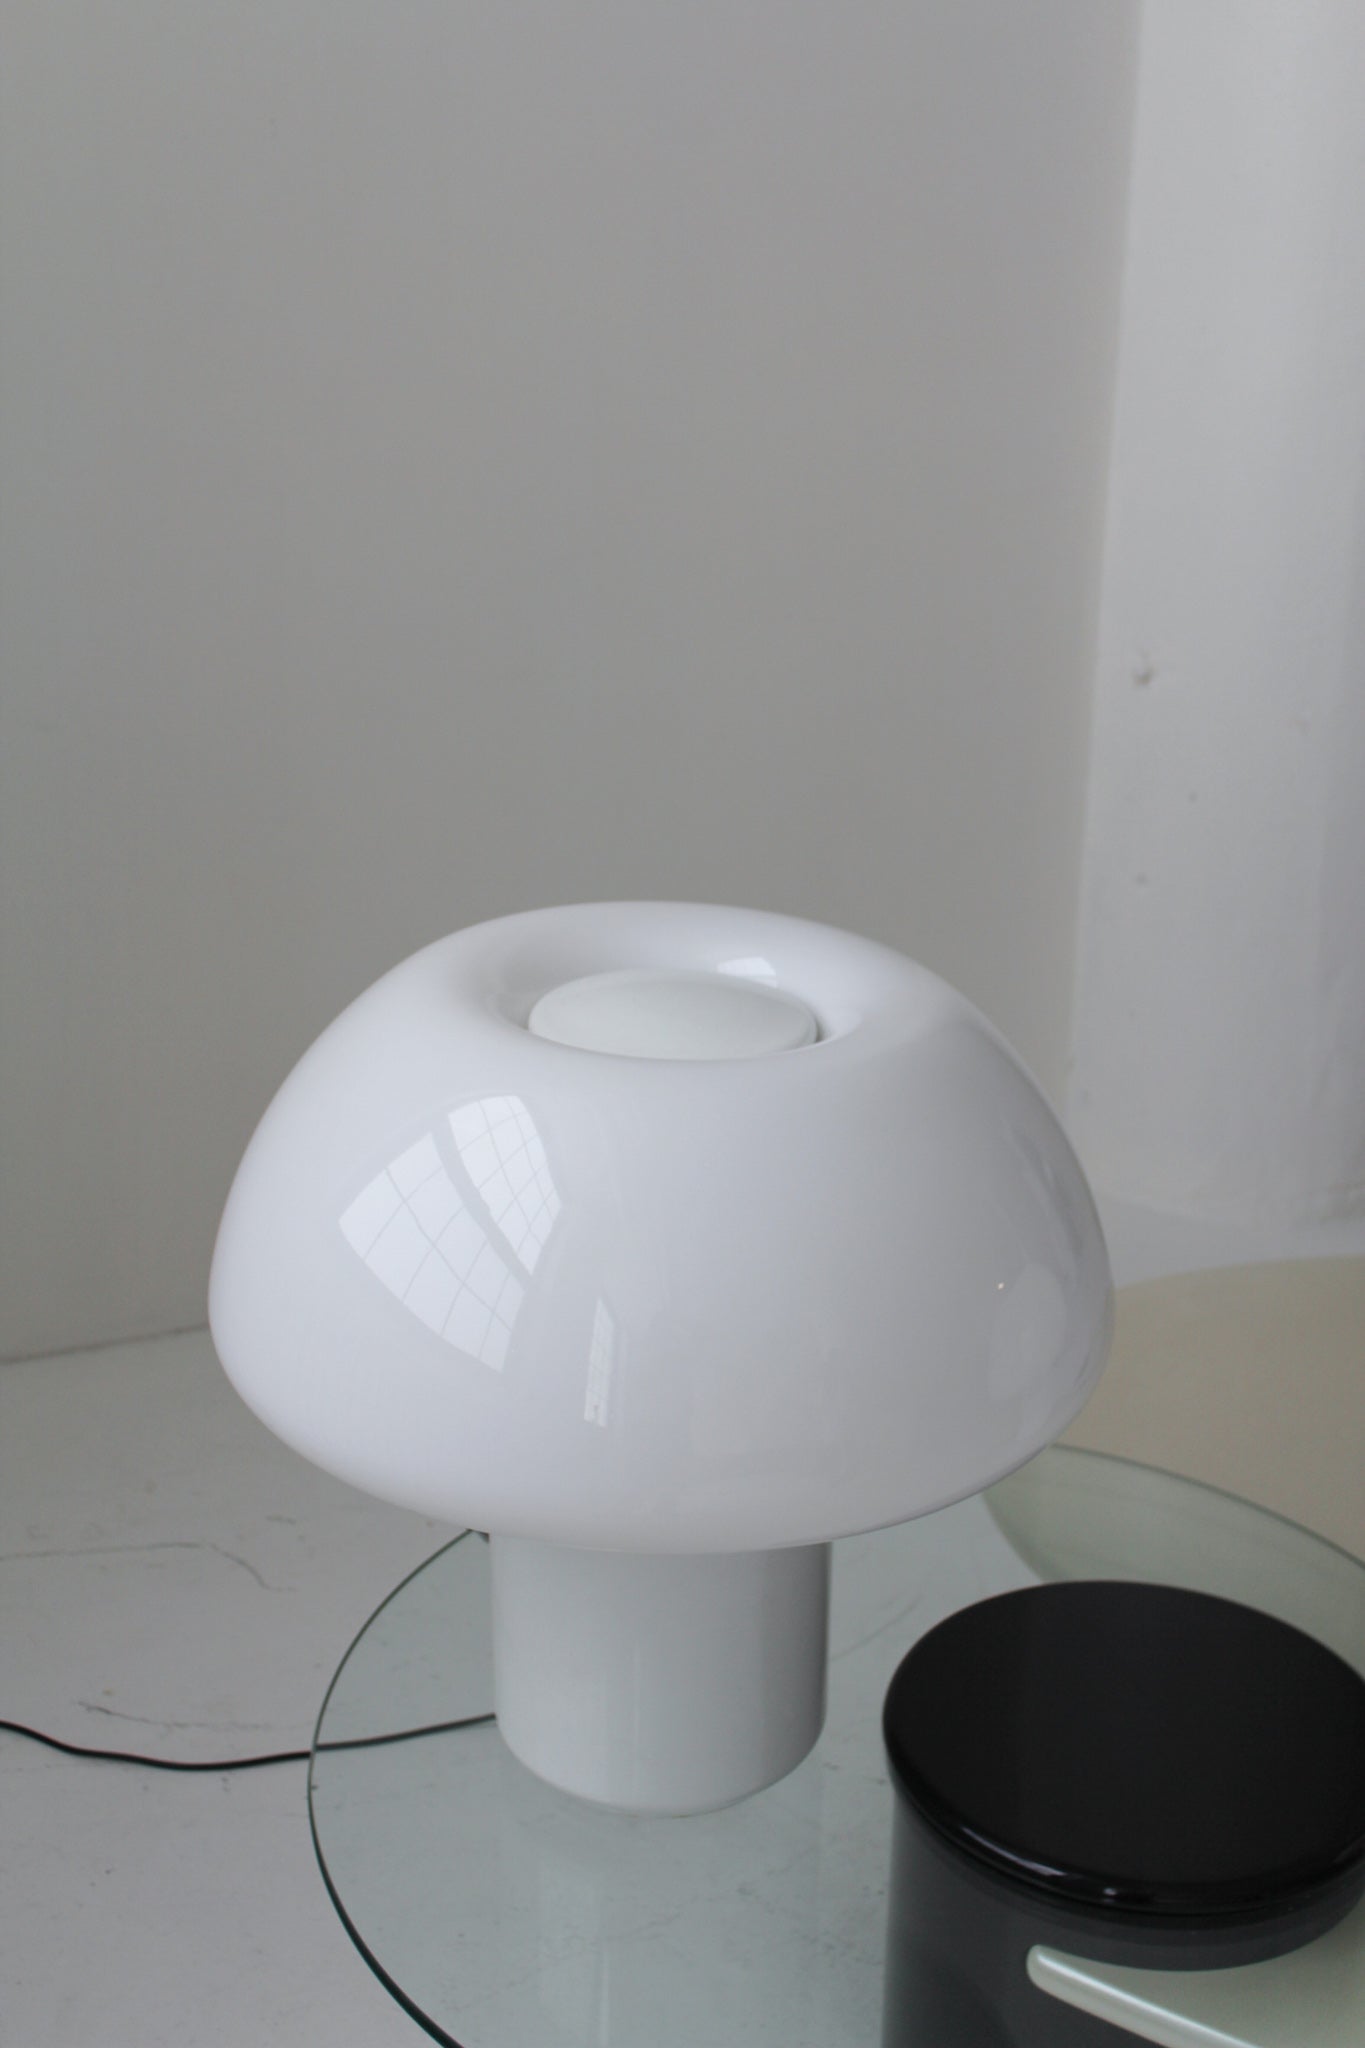 Model 625 Table Lamp by Elio Martinelli For Martinelli Luce